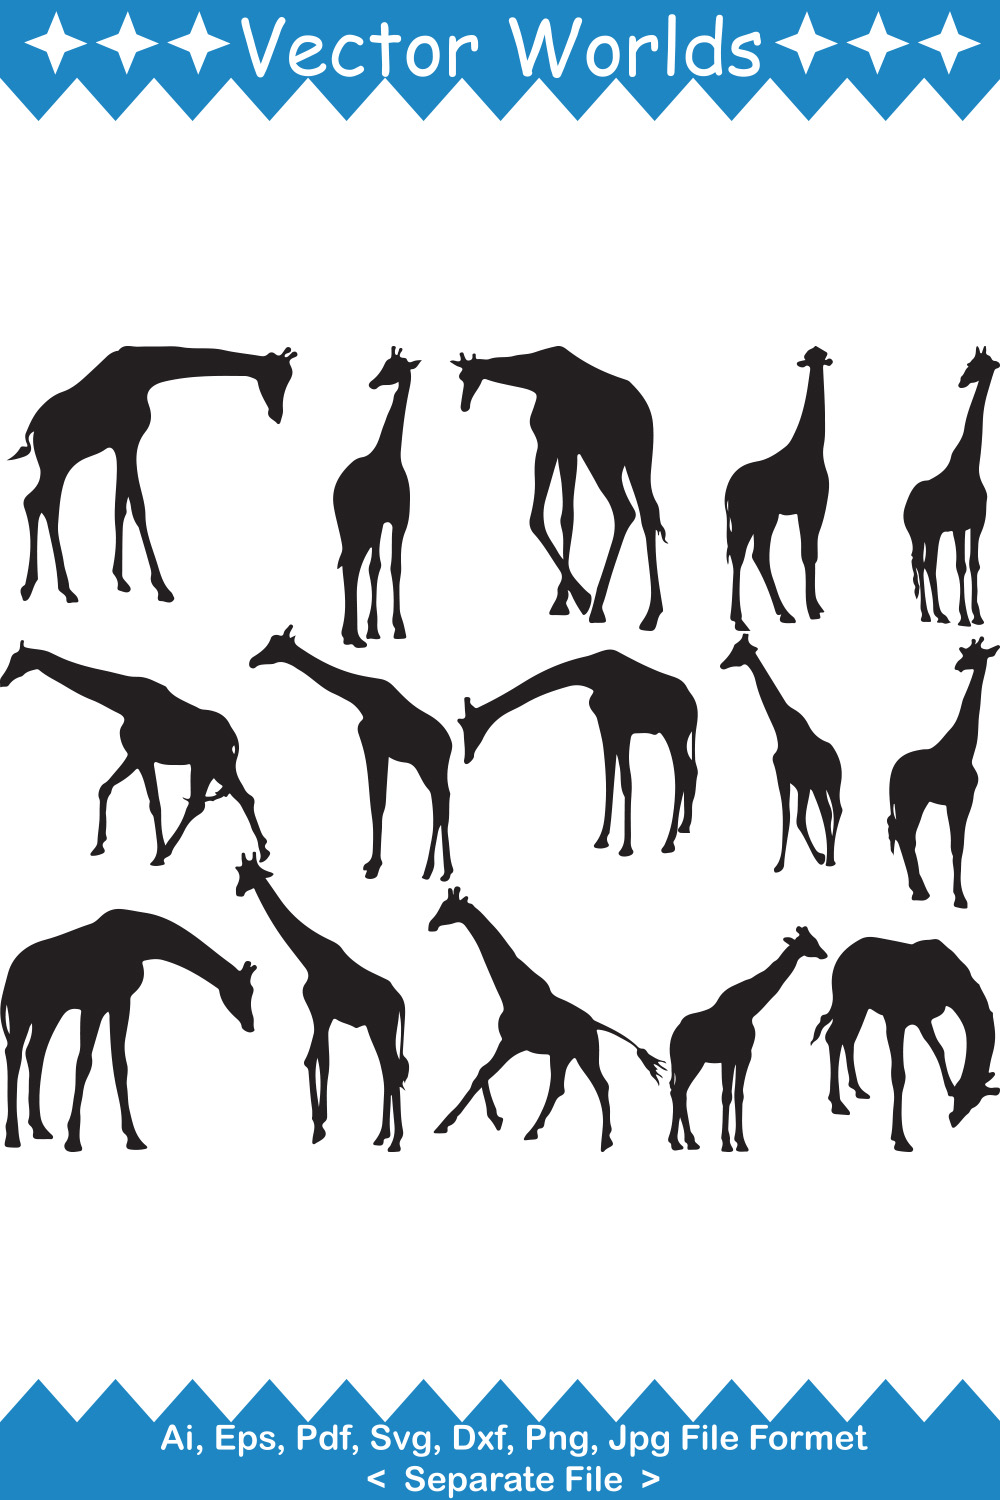 Group of giraffes silhouettes on a white background.